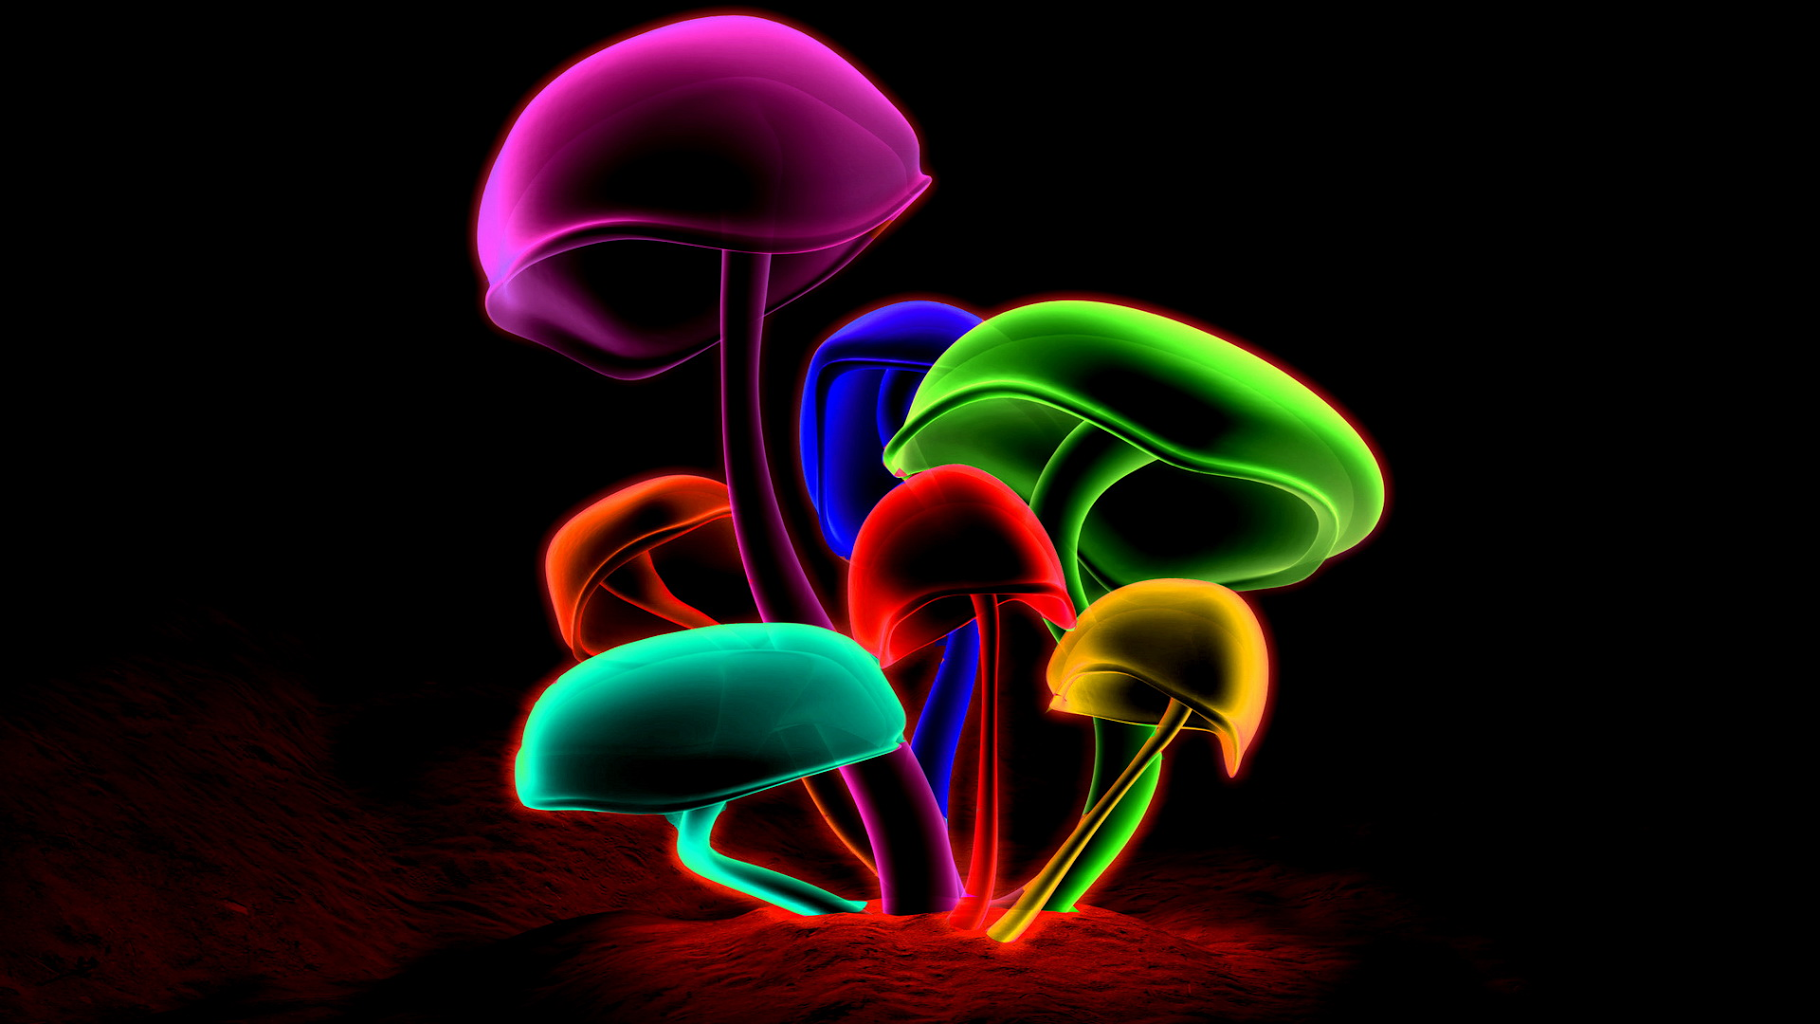  Free UHD for android Amazing 3D Mushroom Free UHD 10 download